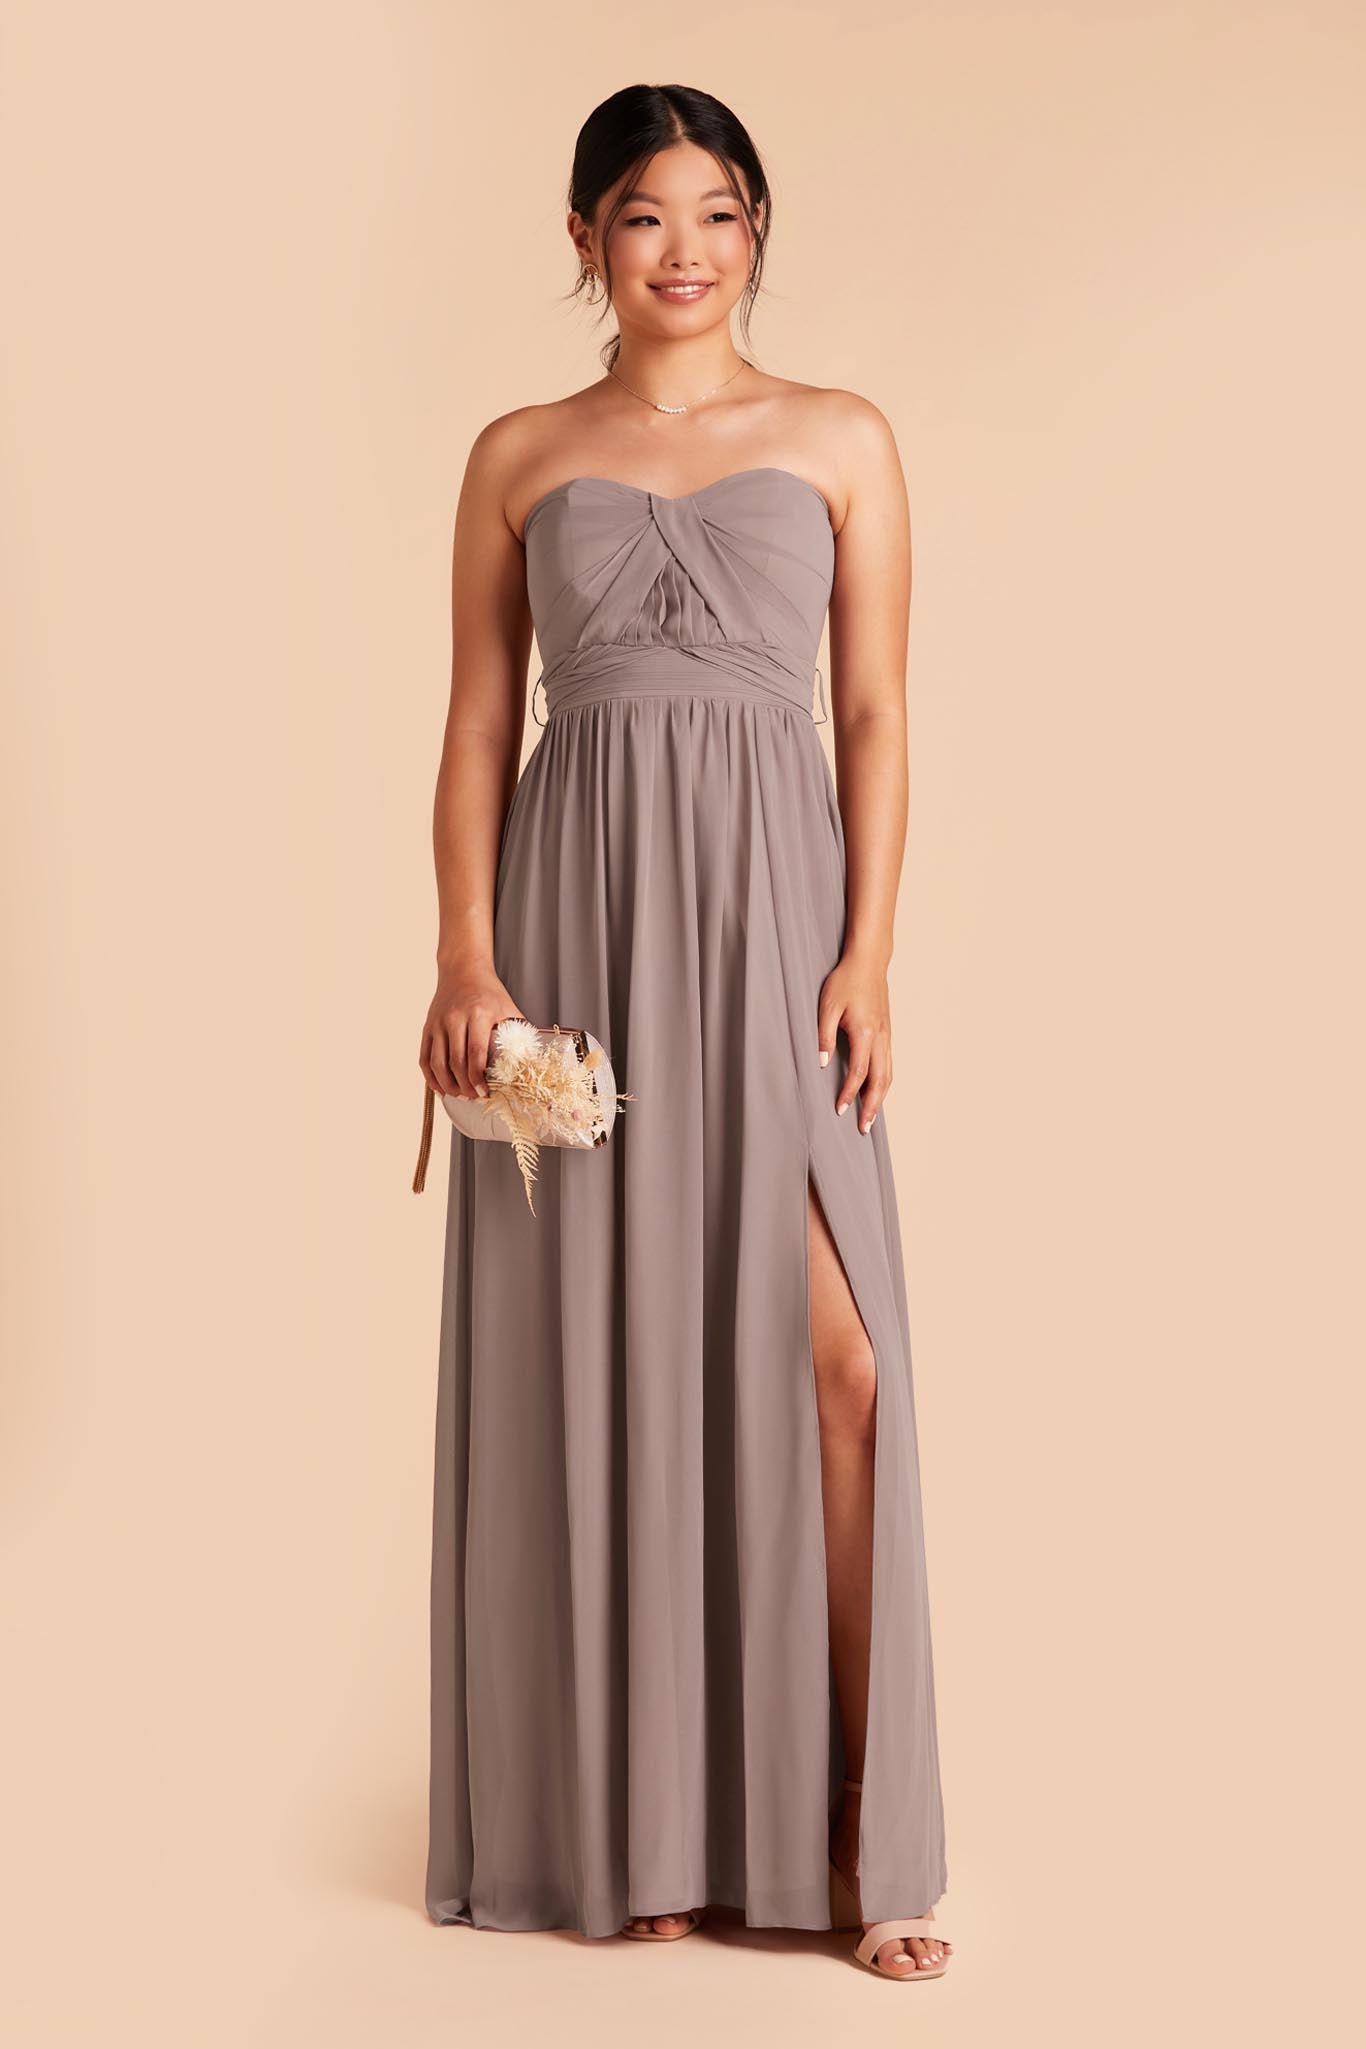 Toffee Grace Convertible Dress by Birdy Grey